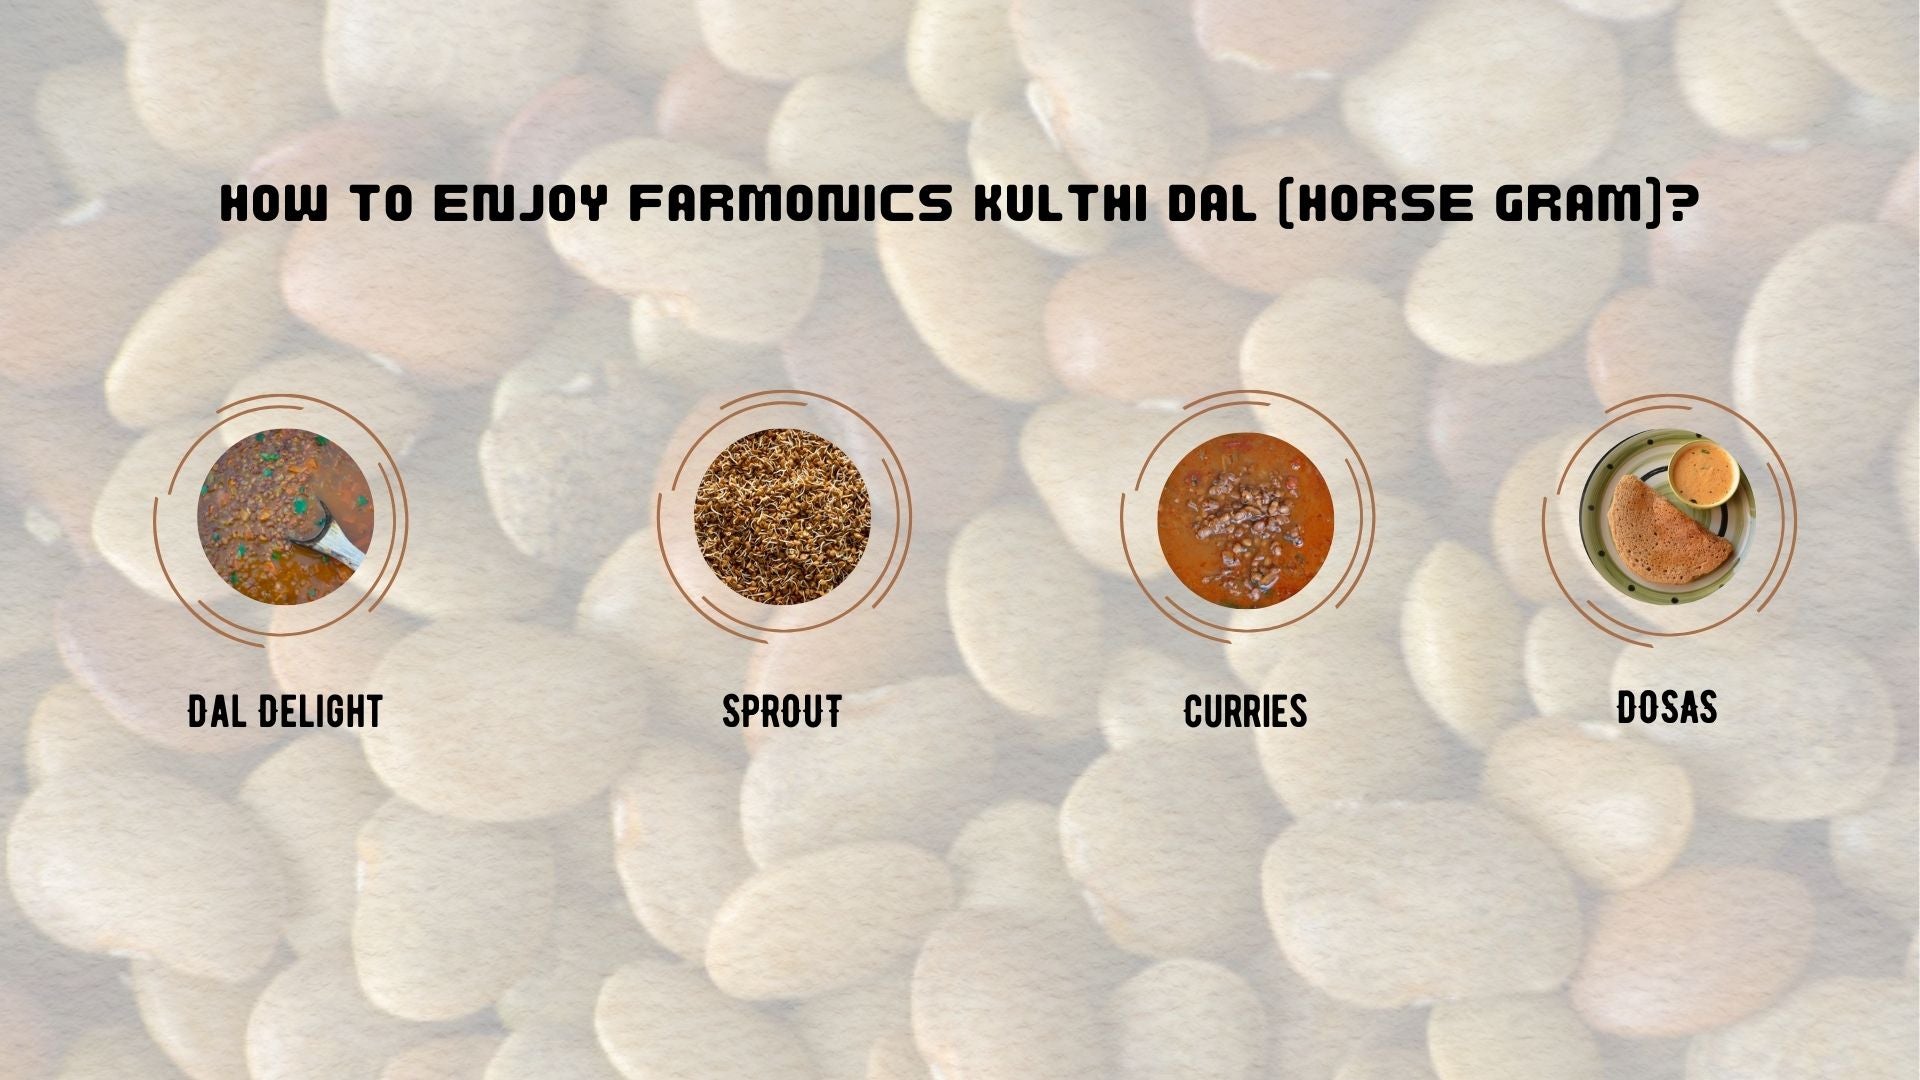 here are list of dishes which you can try from farmonics unpolished kuthi dal